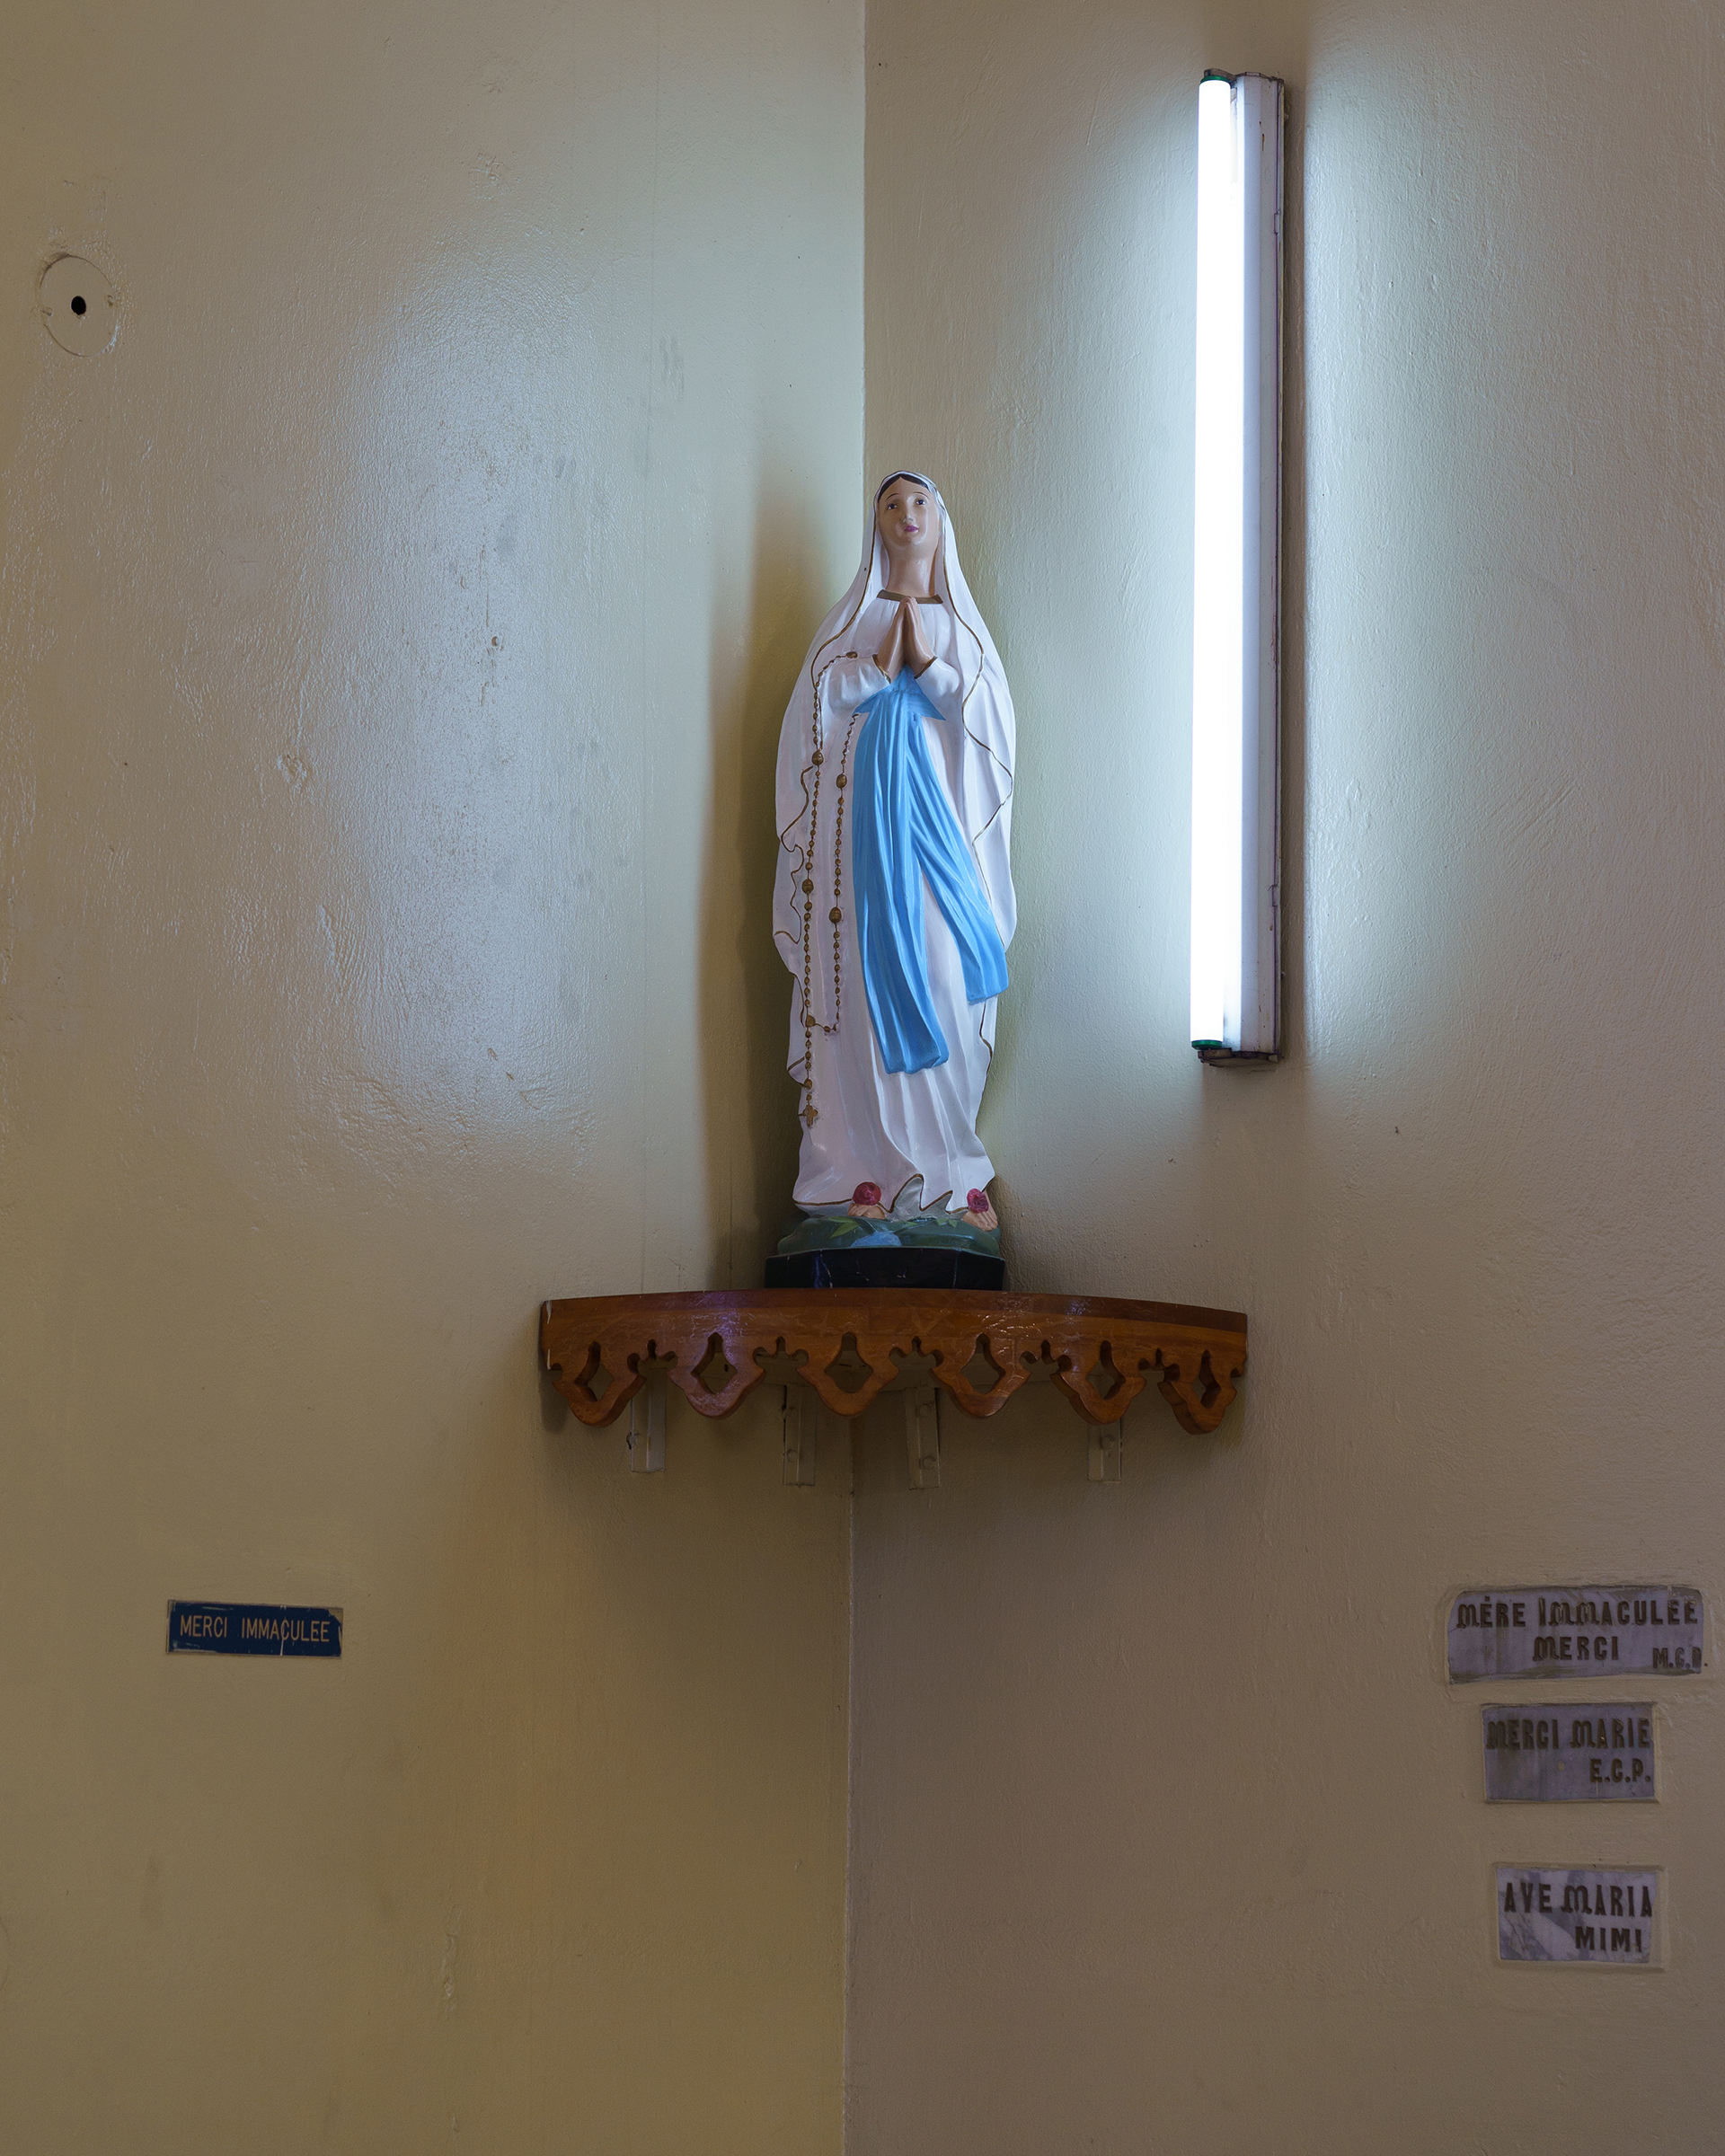 An image of the Virgin Mary is pictured after mass at St. Peter’s Church in Petionville, Port-au-Prince, Haiti on Saturday, January 23, 2022.